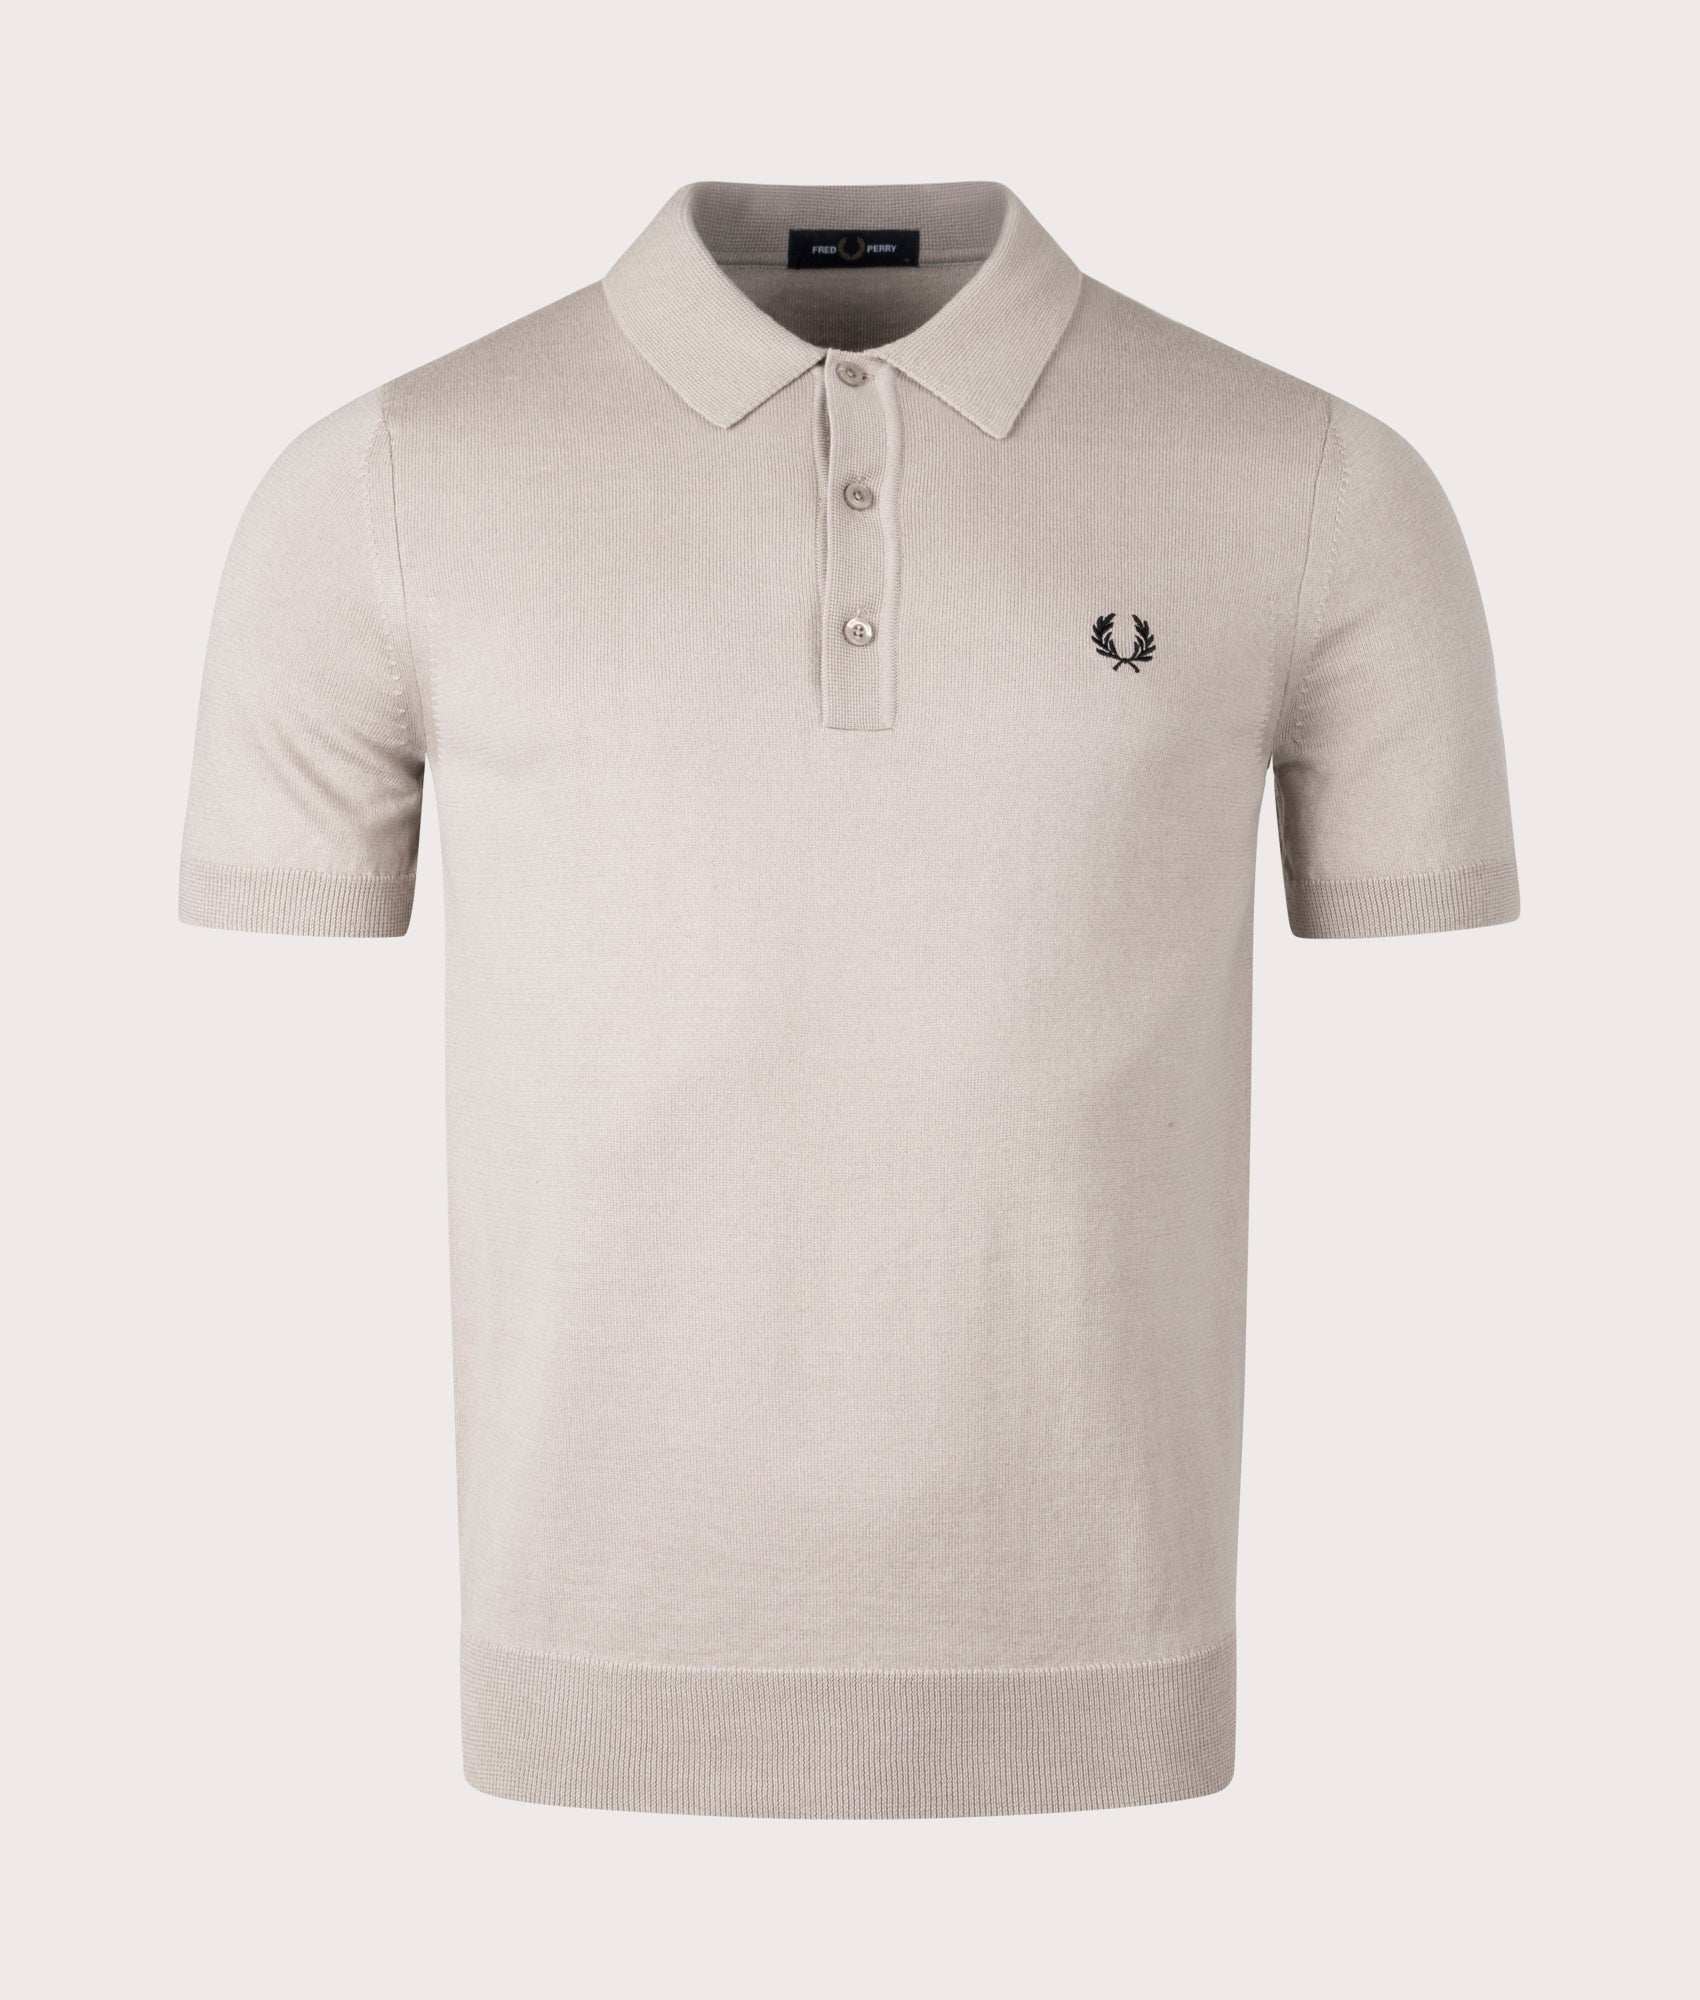 Fred Perry Mens Classic Knitted Polo Shirt - Colour: S56 Dark Oatmeal - Size: Large